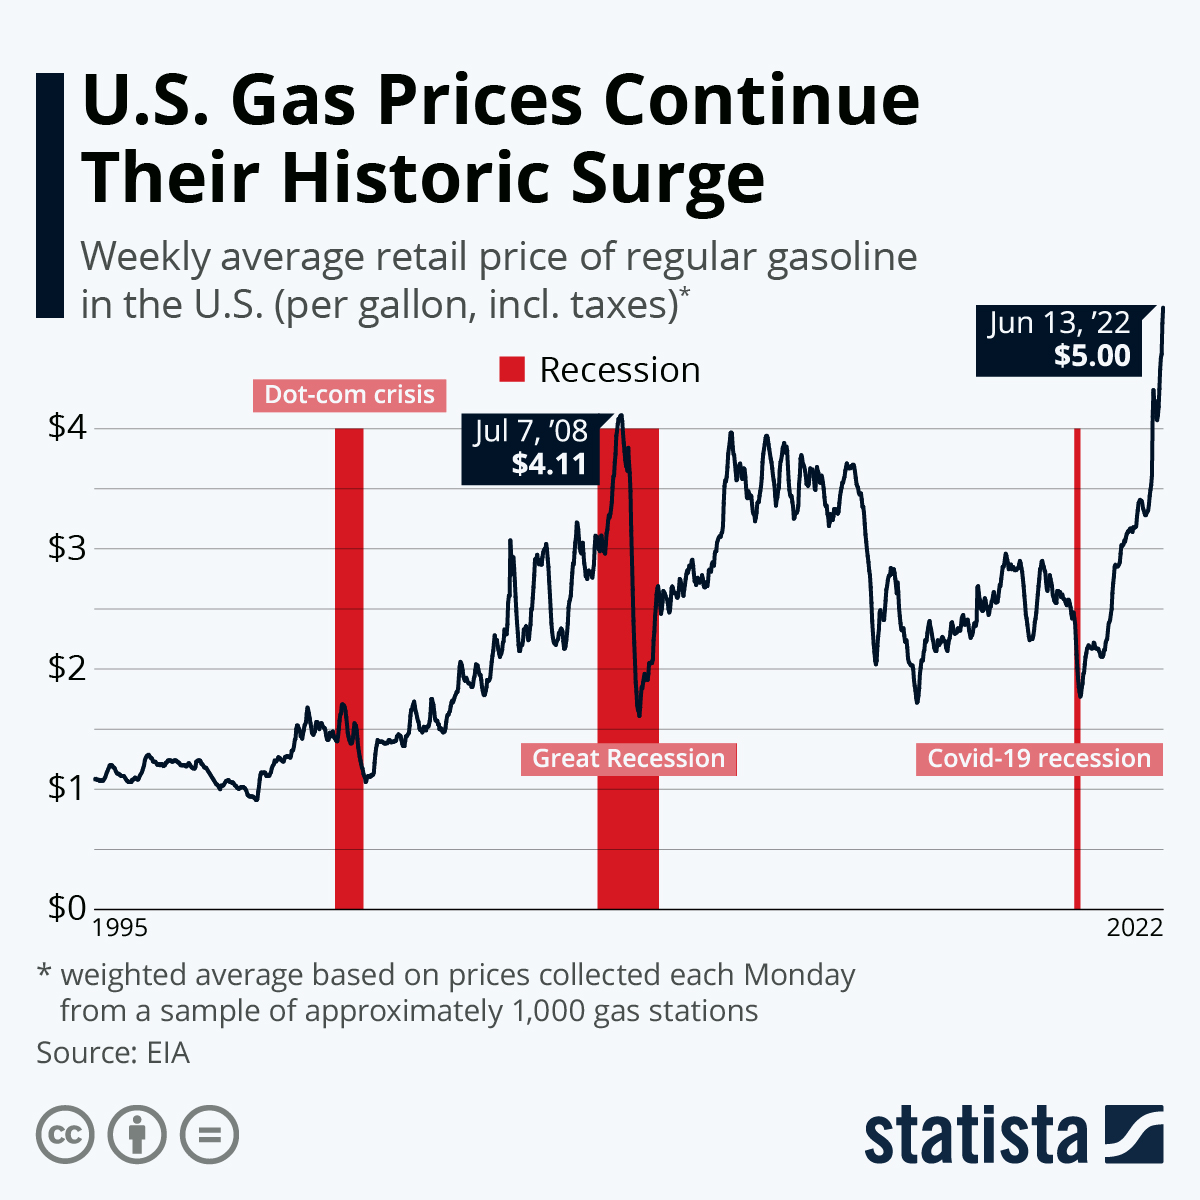 U.S. Gas Prices Continue Their Historic Surge